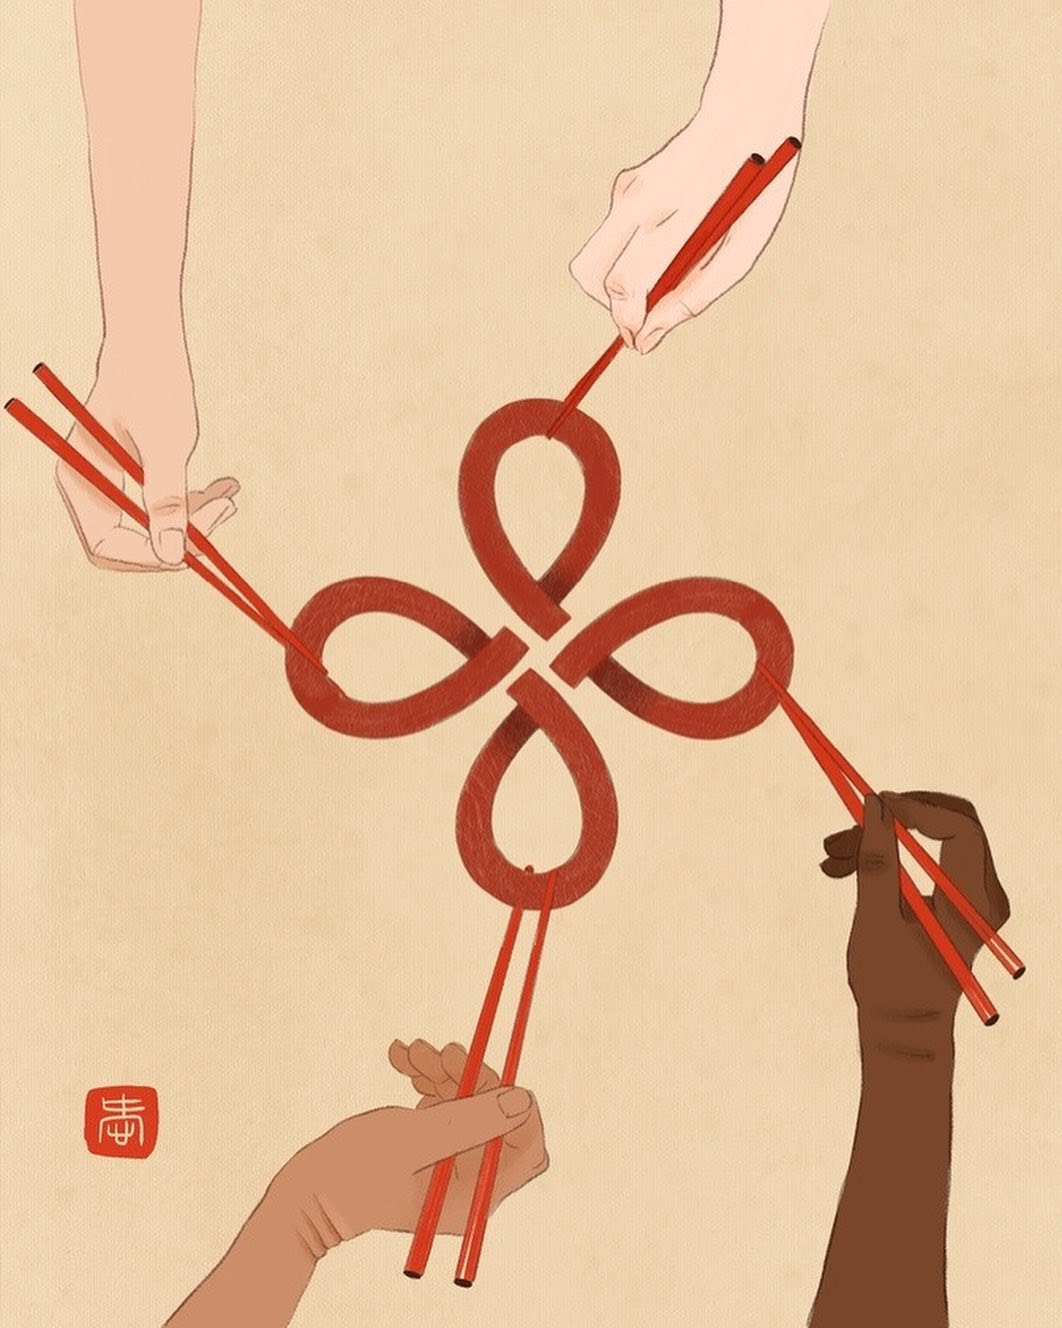 An illustration of four hands with chop sticks each reaching for a piece of a knot. 